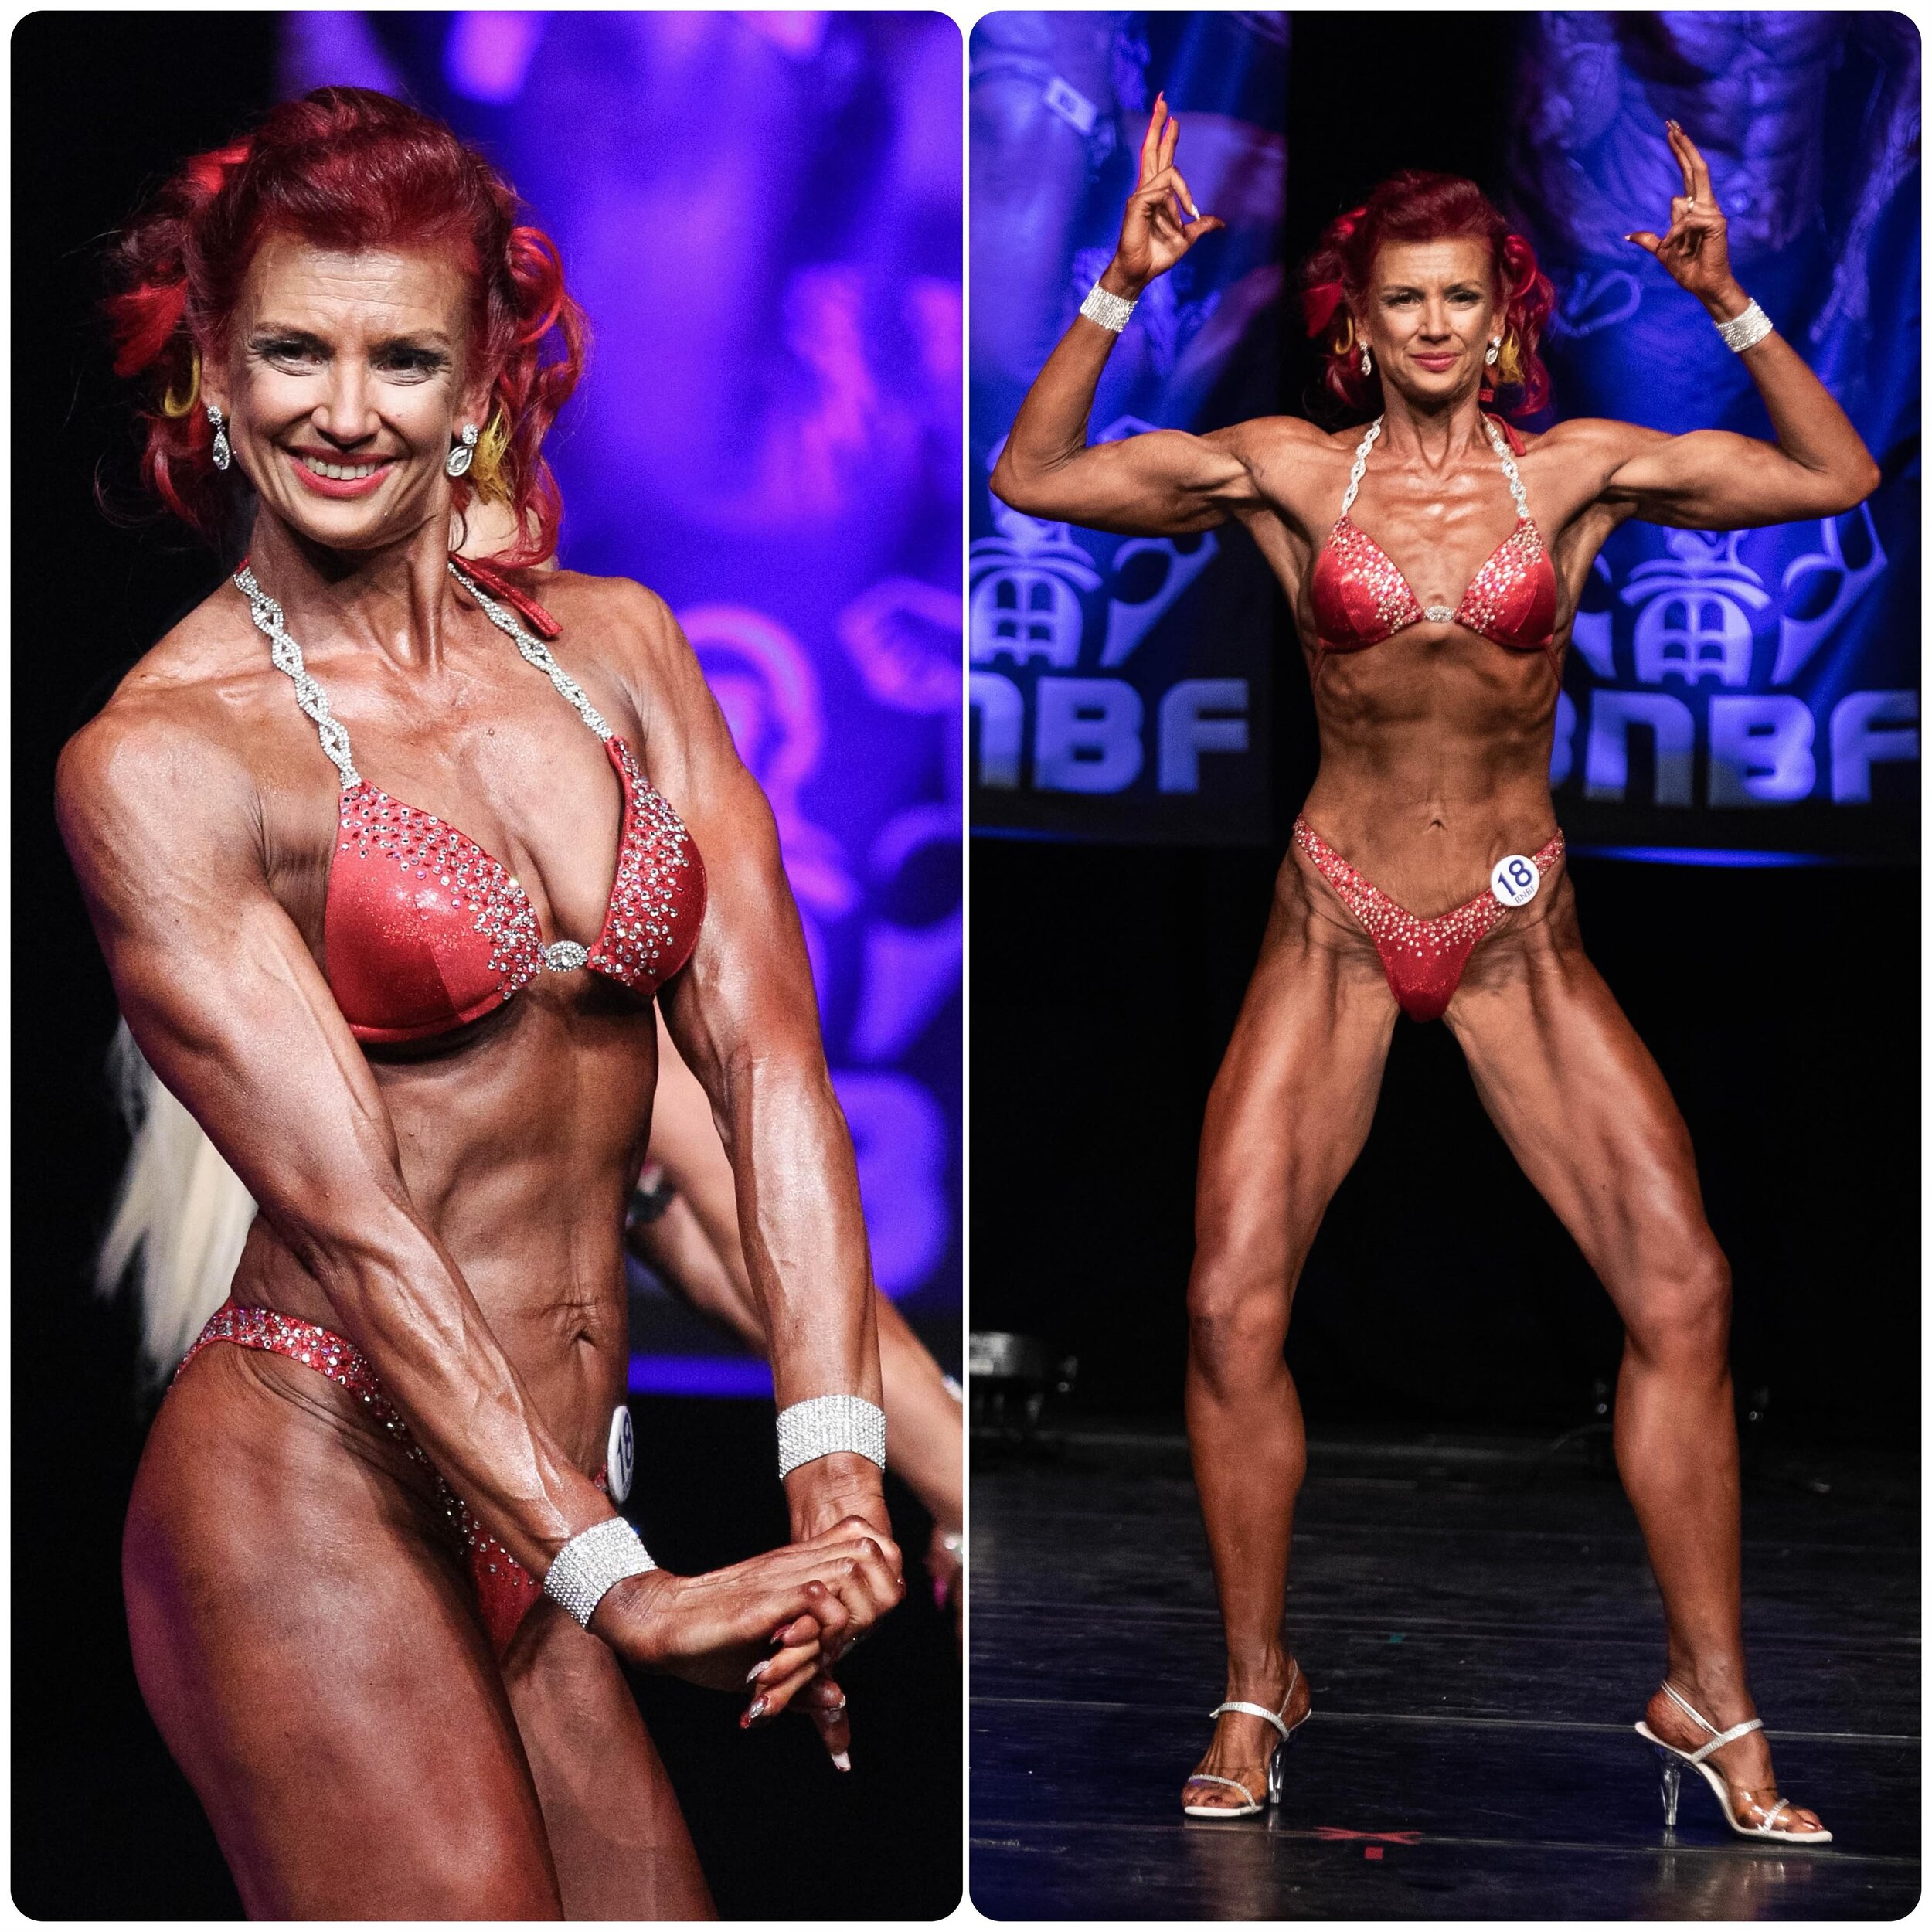 Client Work

Michelle Smith or as her alter ego was known Talula! Here she is winning Miss Scotland, looking fab in her 50s

#wnbfuk #NutritionForMuscle #naturalmuscle #natty  #ipepro
#PhysiologyOfTraining #posingcoach #PhysiologyOfTraining #usbf #wn